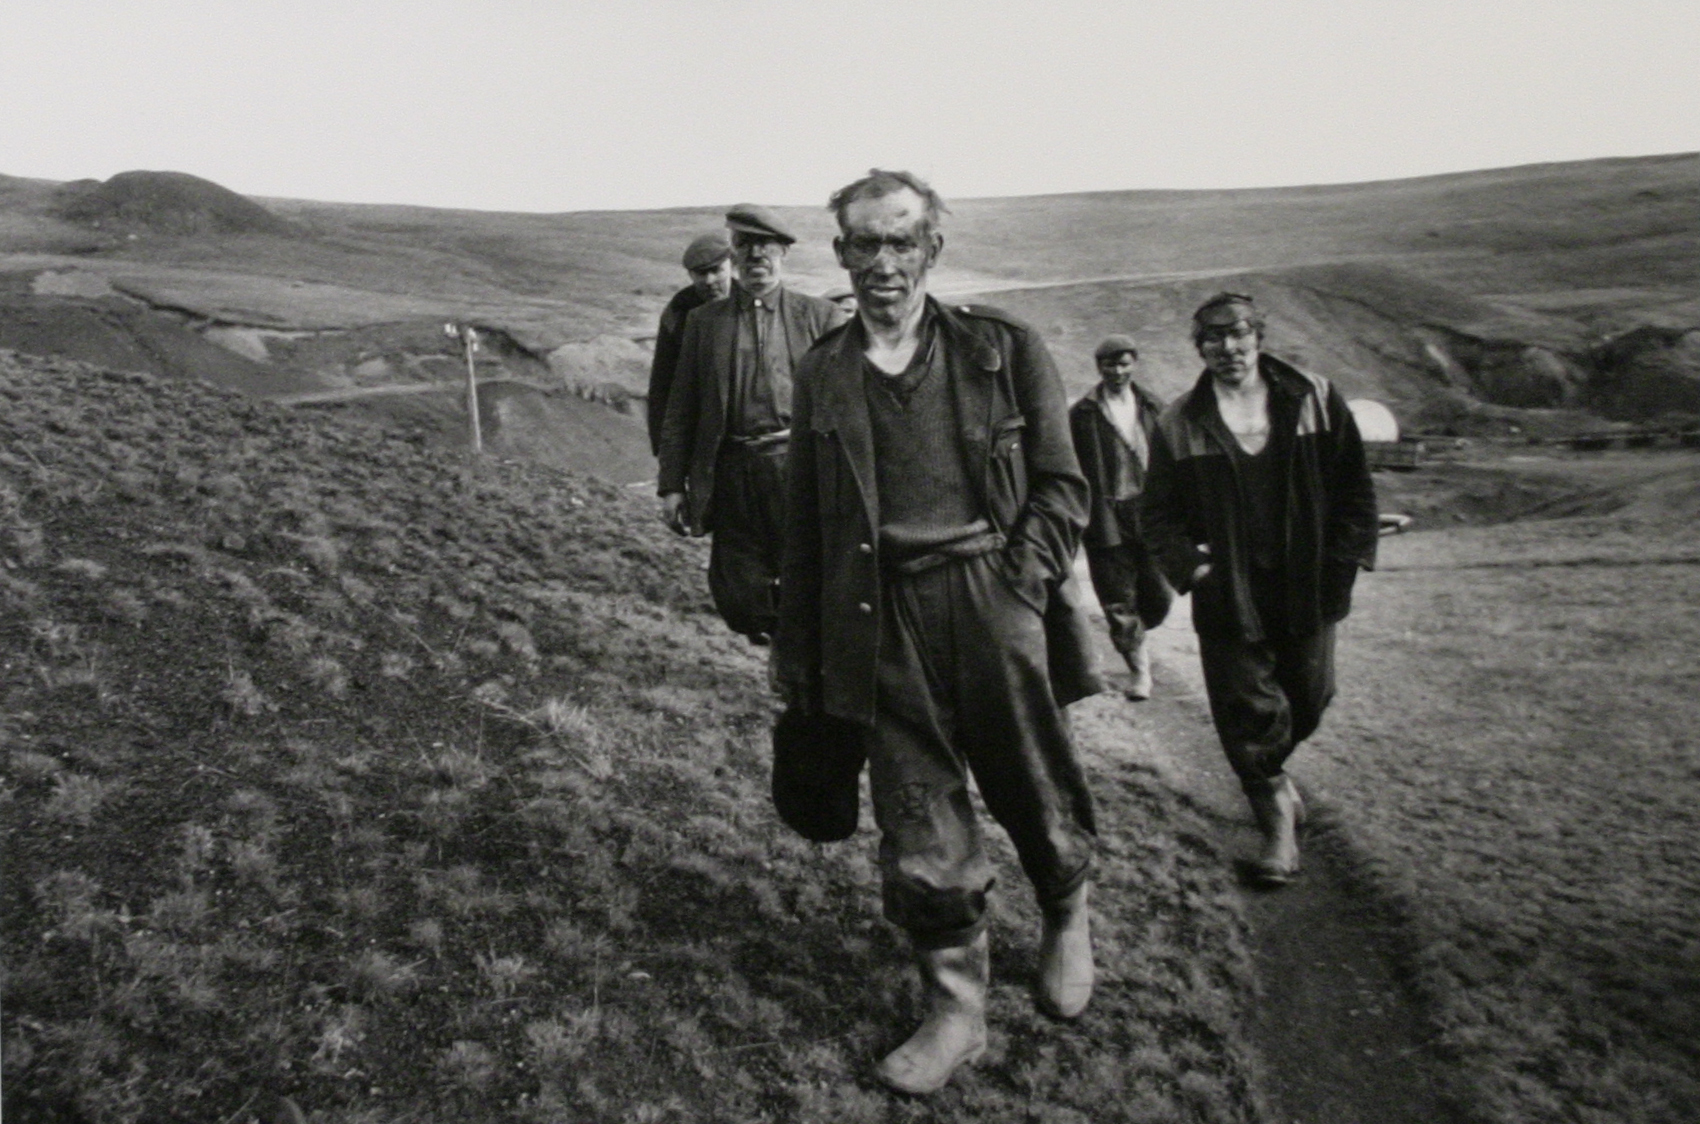 Bruce Davidson, Welsh Miners ed. #36 Sequence #8, 1982. Silver gelatin print. Collection of DePaul University, Gift of Noel & Florence Rothman, 2001.34